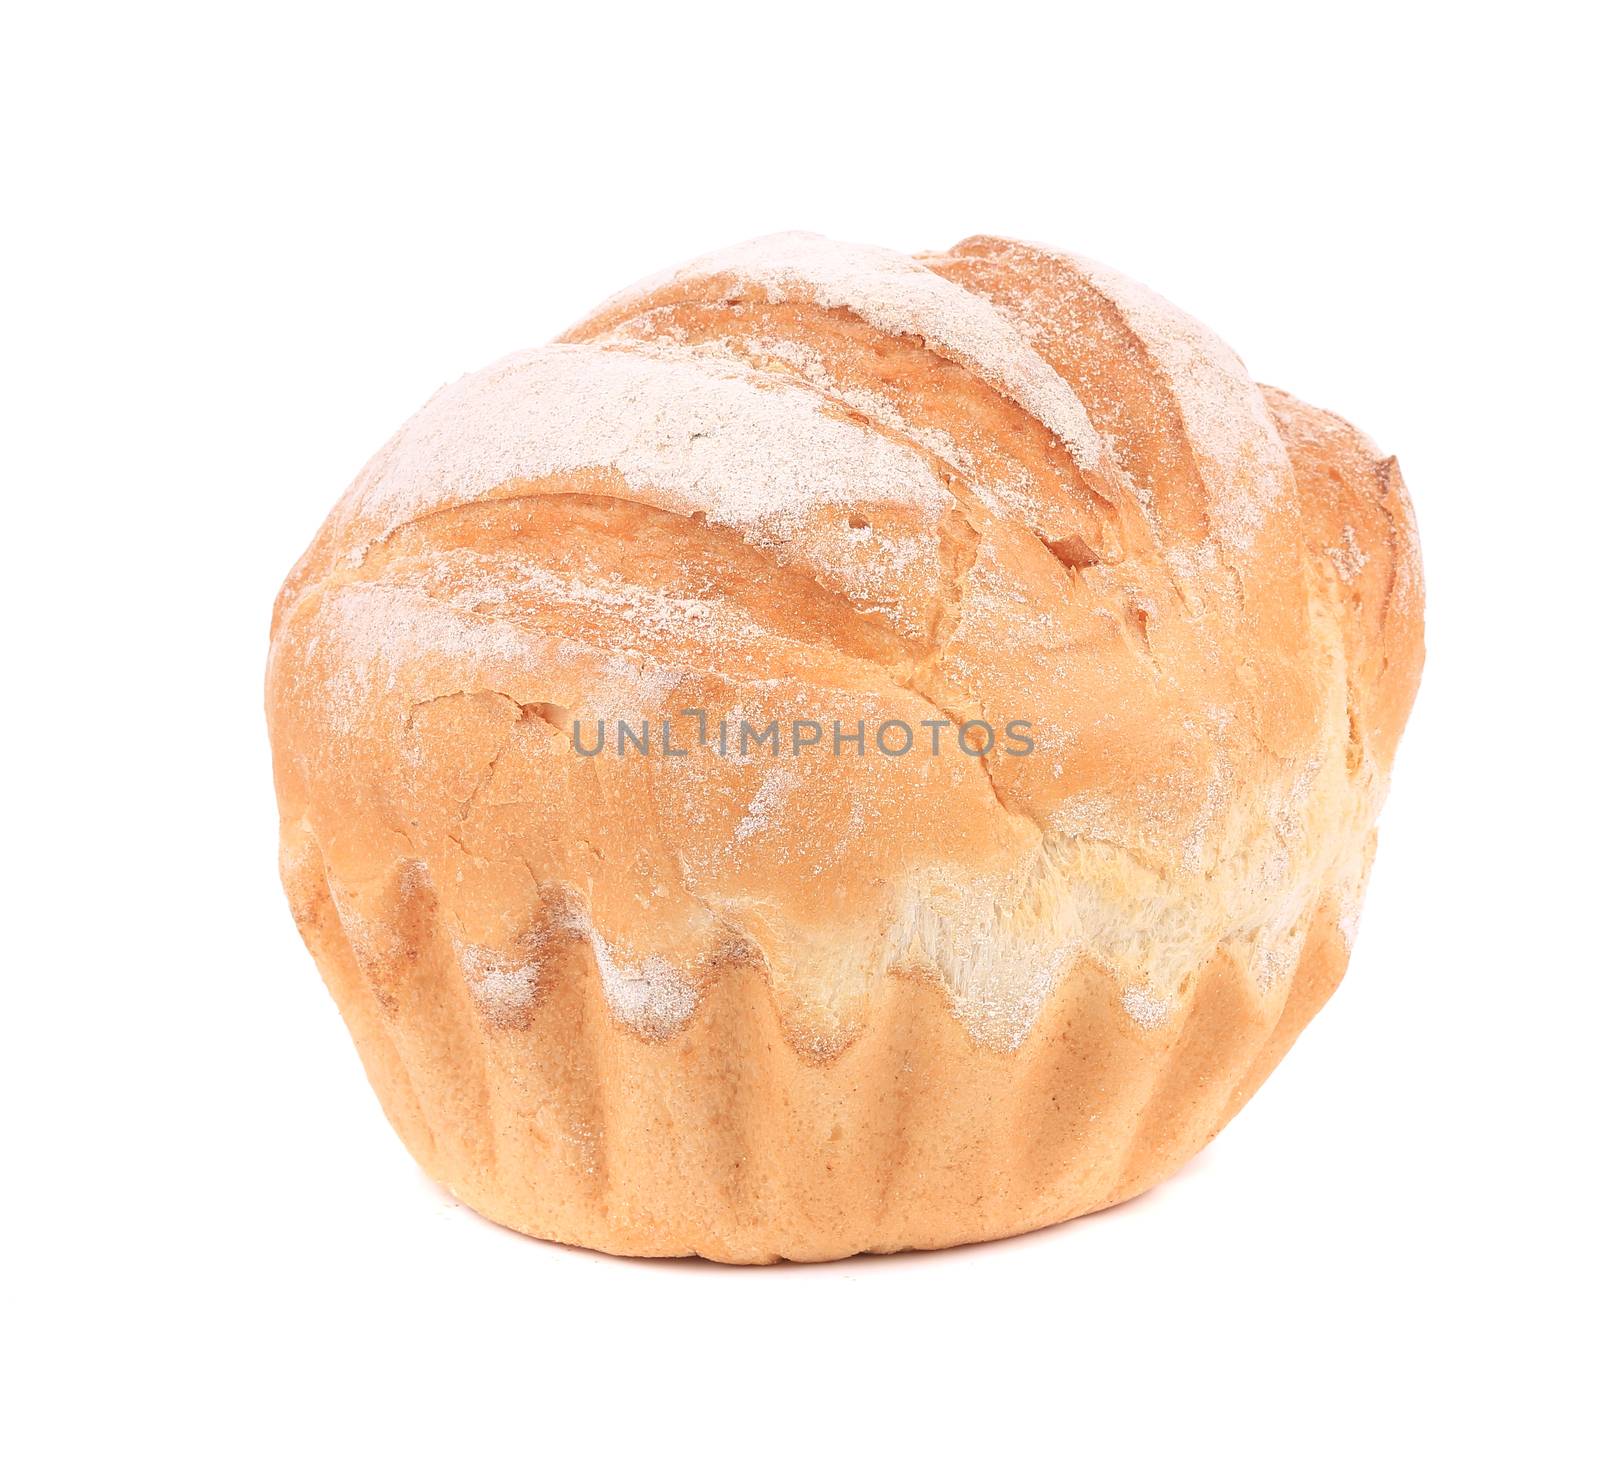 Large loaf of bread. Isolated on a white background.